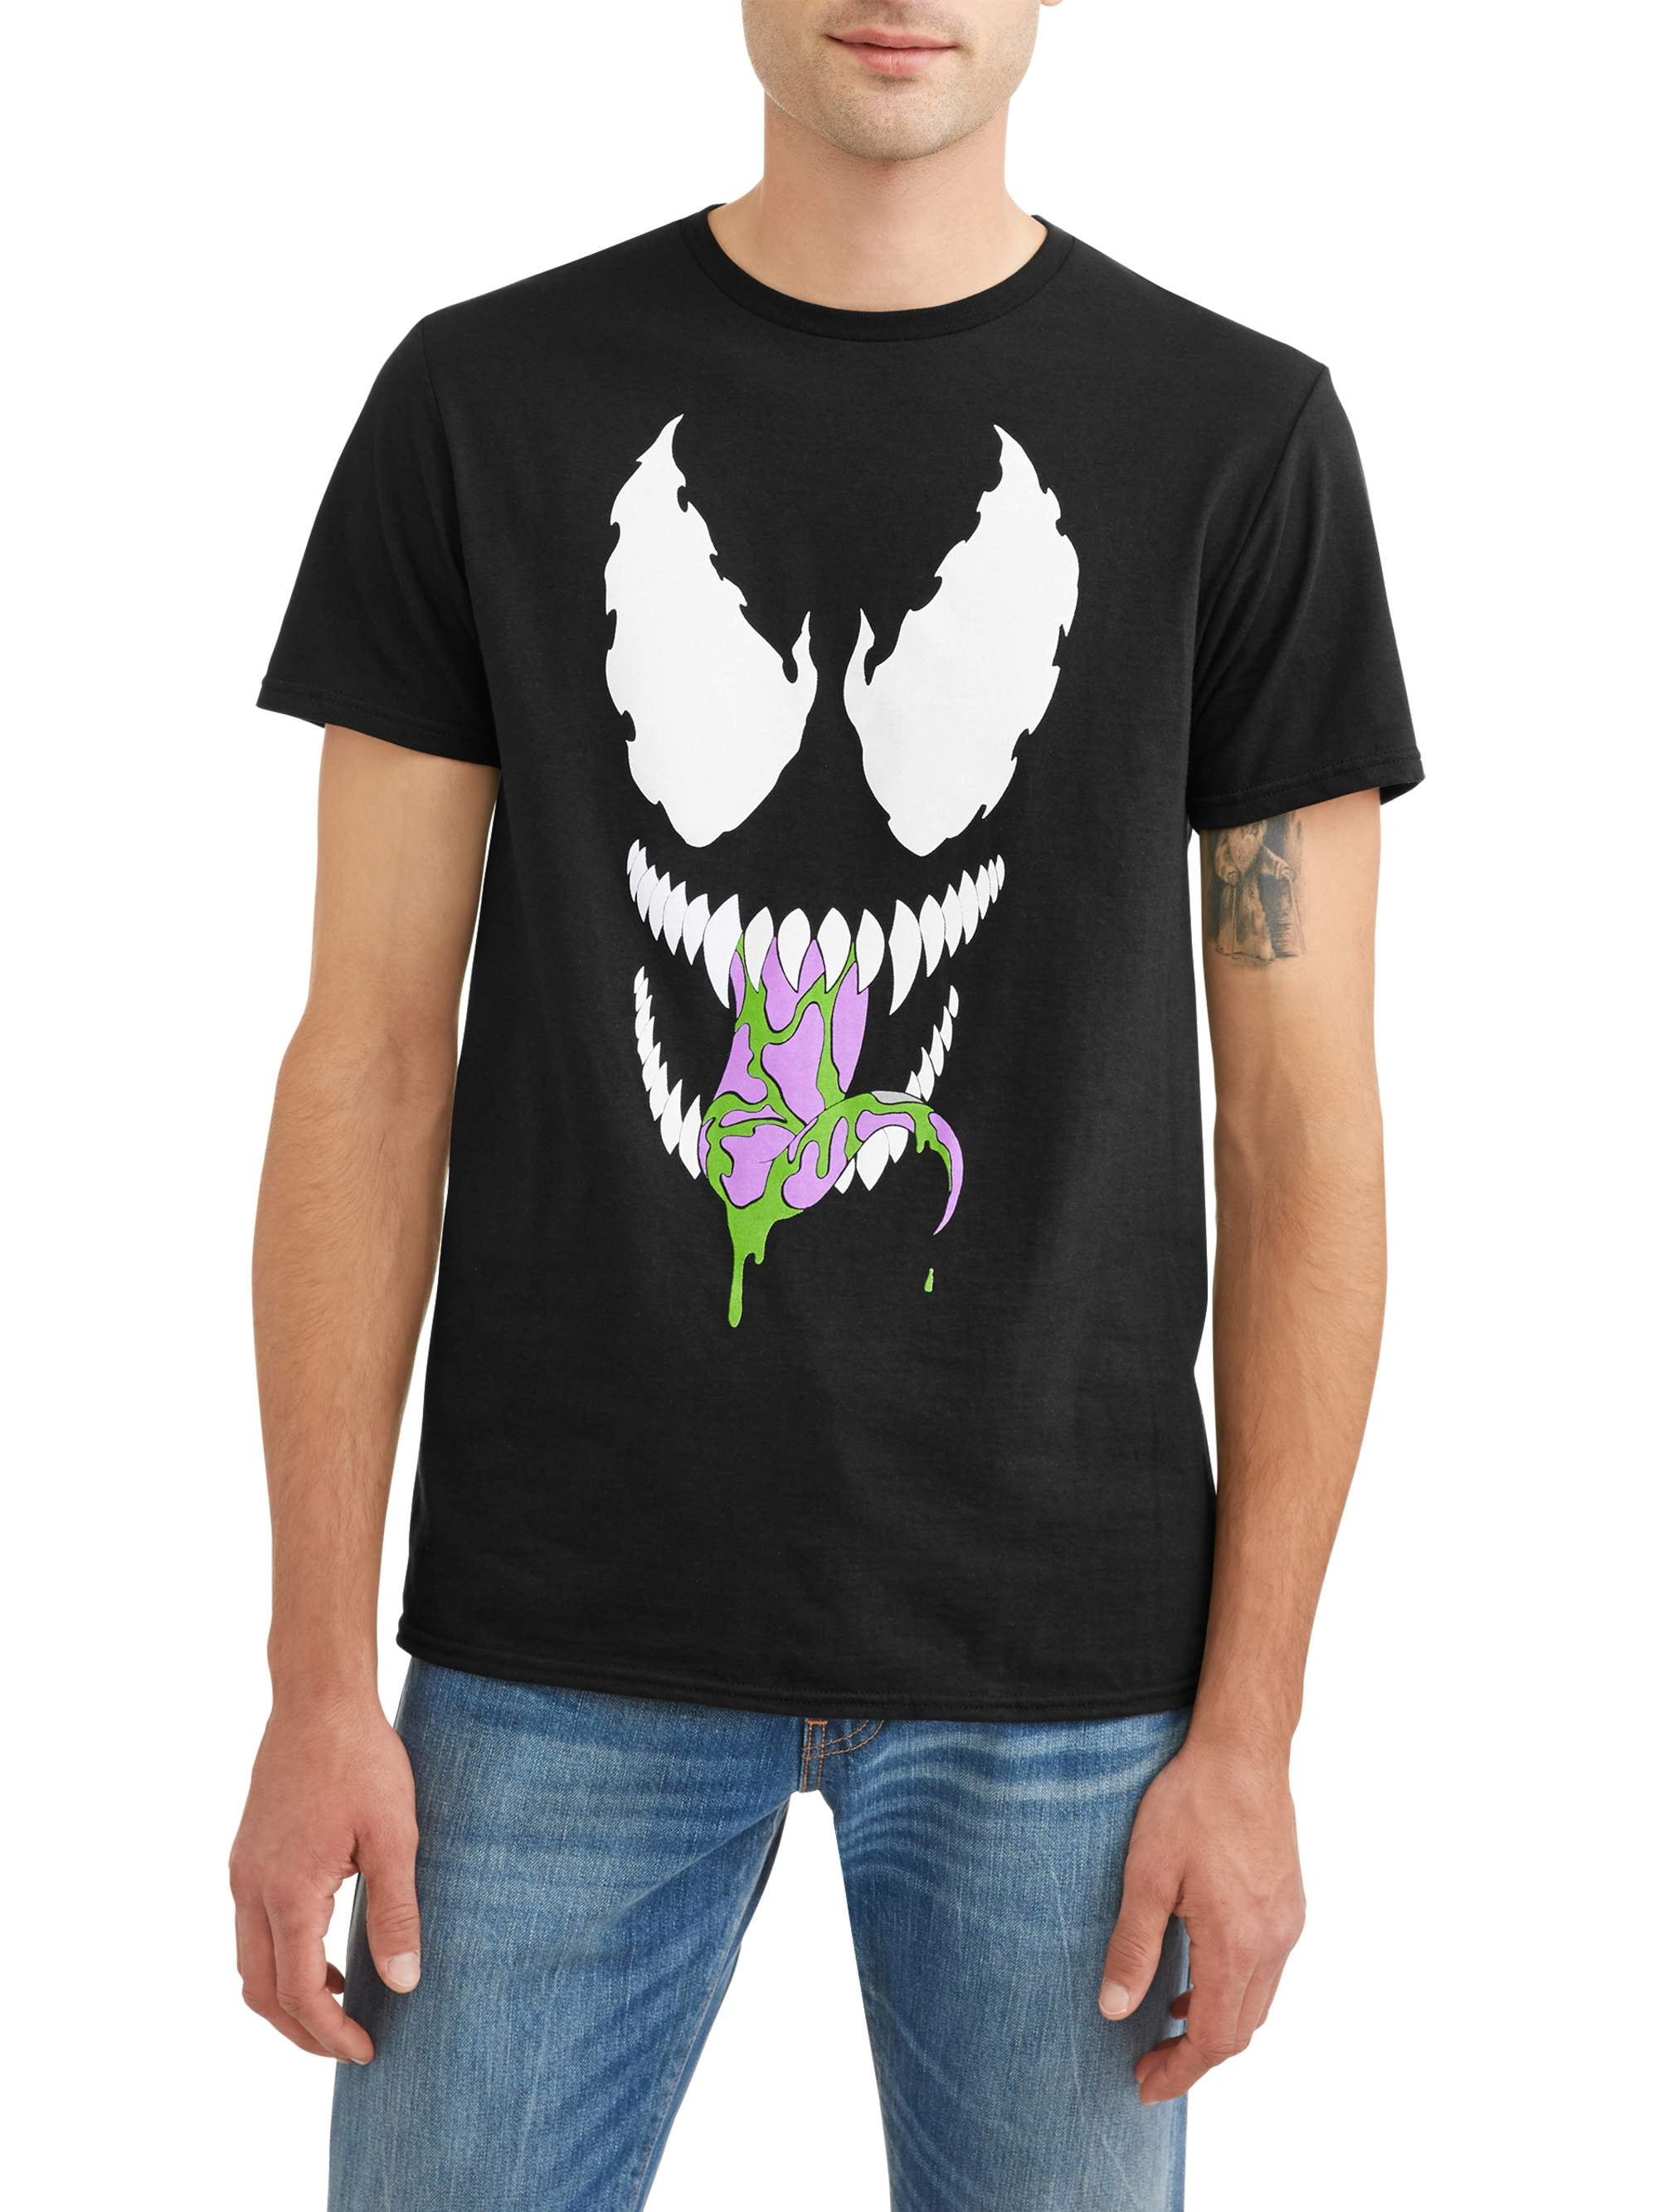 Men's Venom Bright Graphic Tee, Available up to size 2XL - Walmart.com